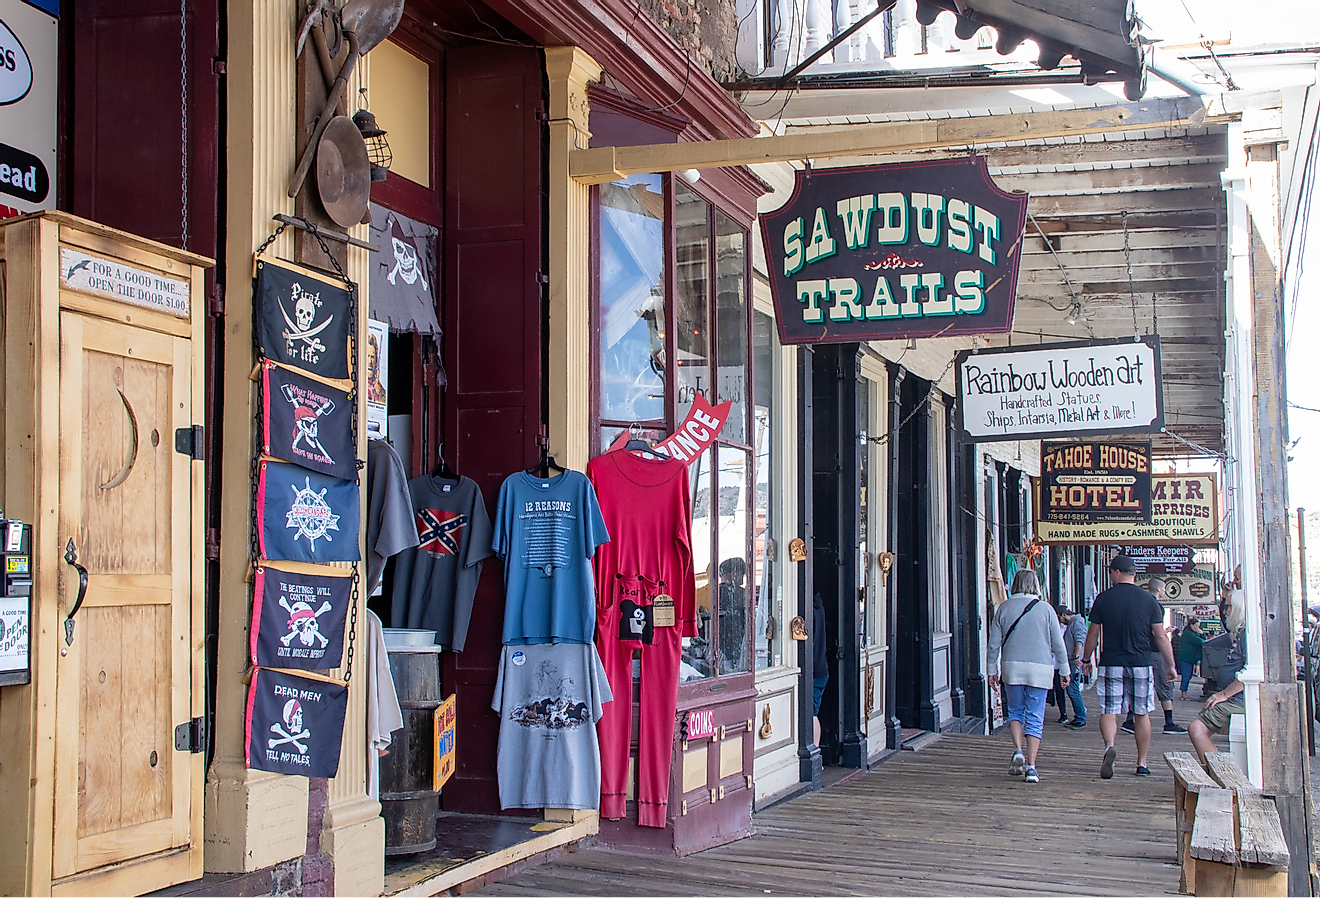 Stores Along the Streets of Old Gold and Silver Mining Town of Virginia City, Nevada. Image credit Arne Beruldsen via Shutterstock